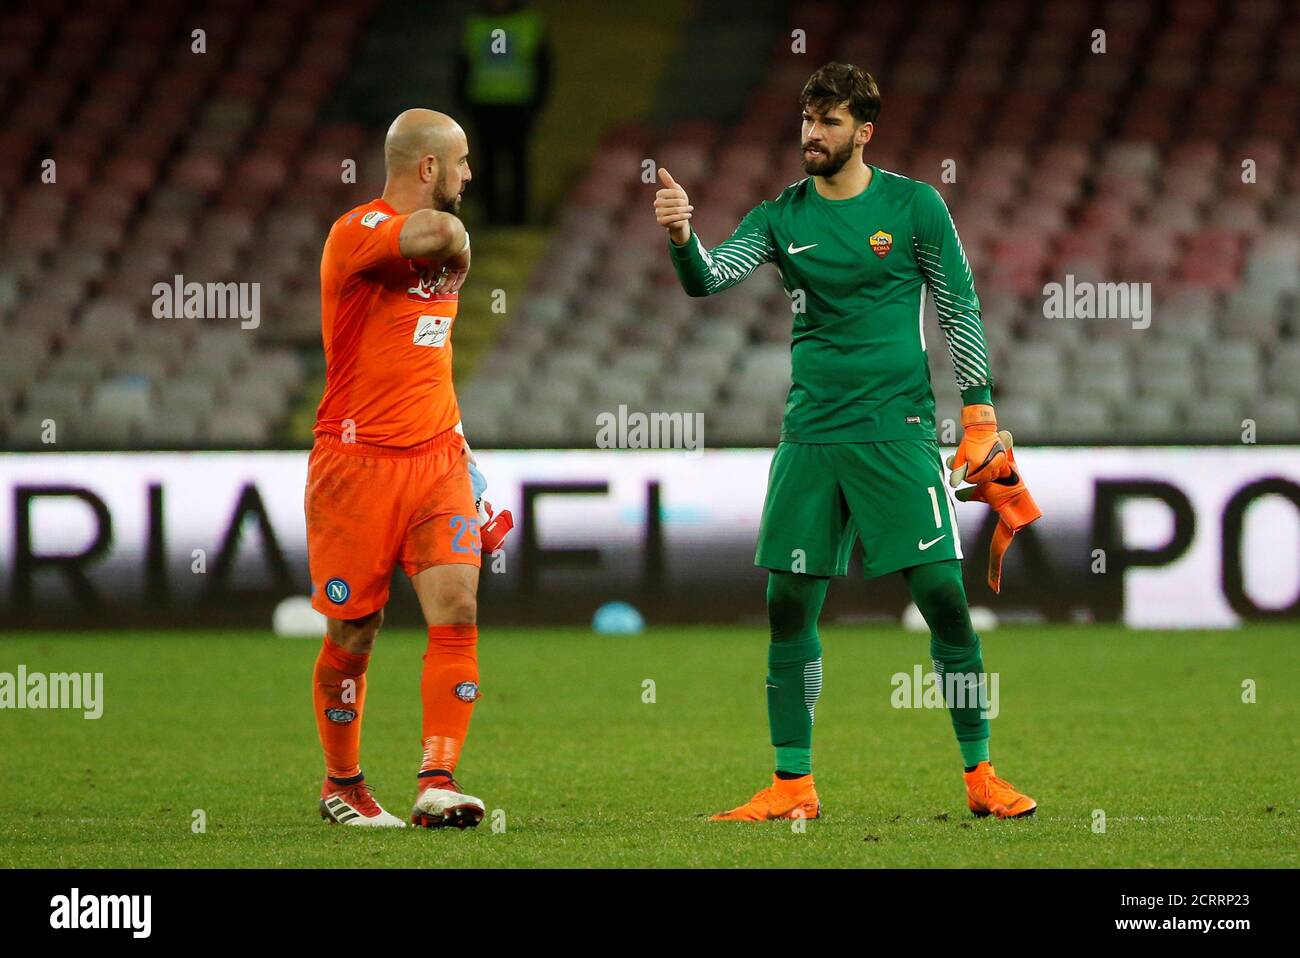 Soccer Football - Serie A - Napoli vs AS Roma - Stadio San Paolo, Naples,  Italy - March 3, 2018 Napoli's Pepe Reina and Roma's Alisson Becker after  the match REUTERS/Ciro De Luca Stock Photo - Alamy